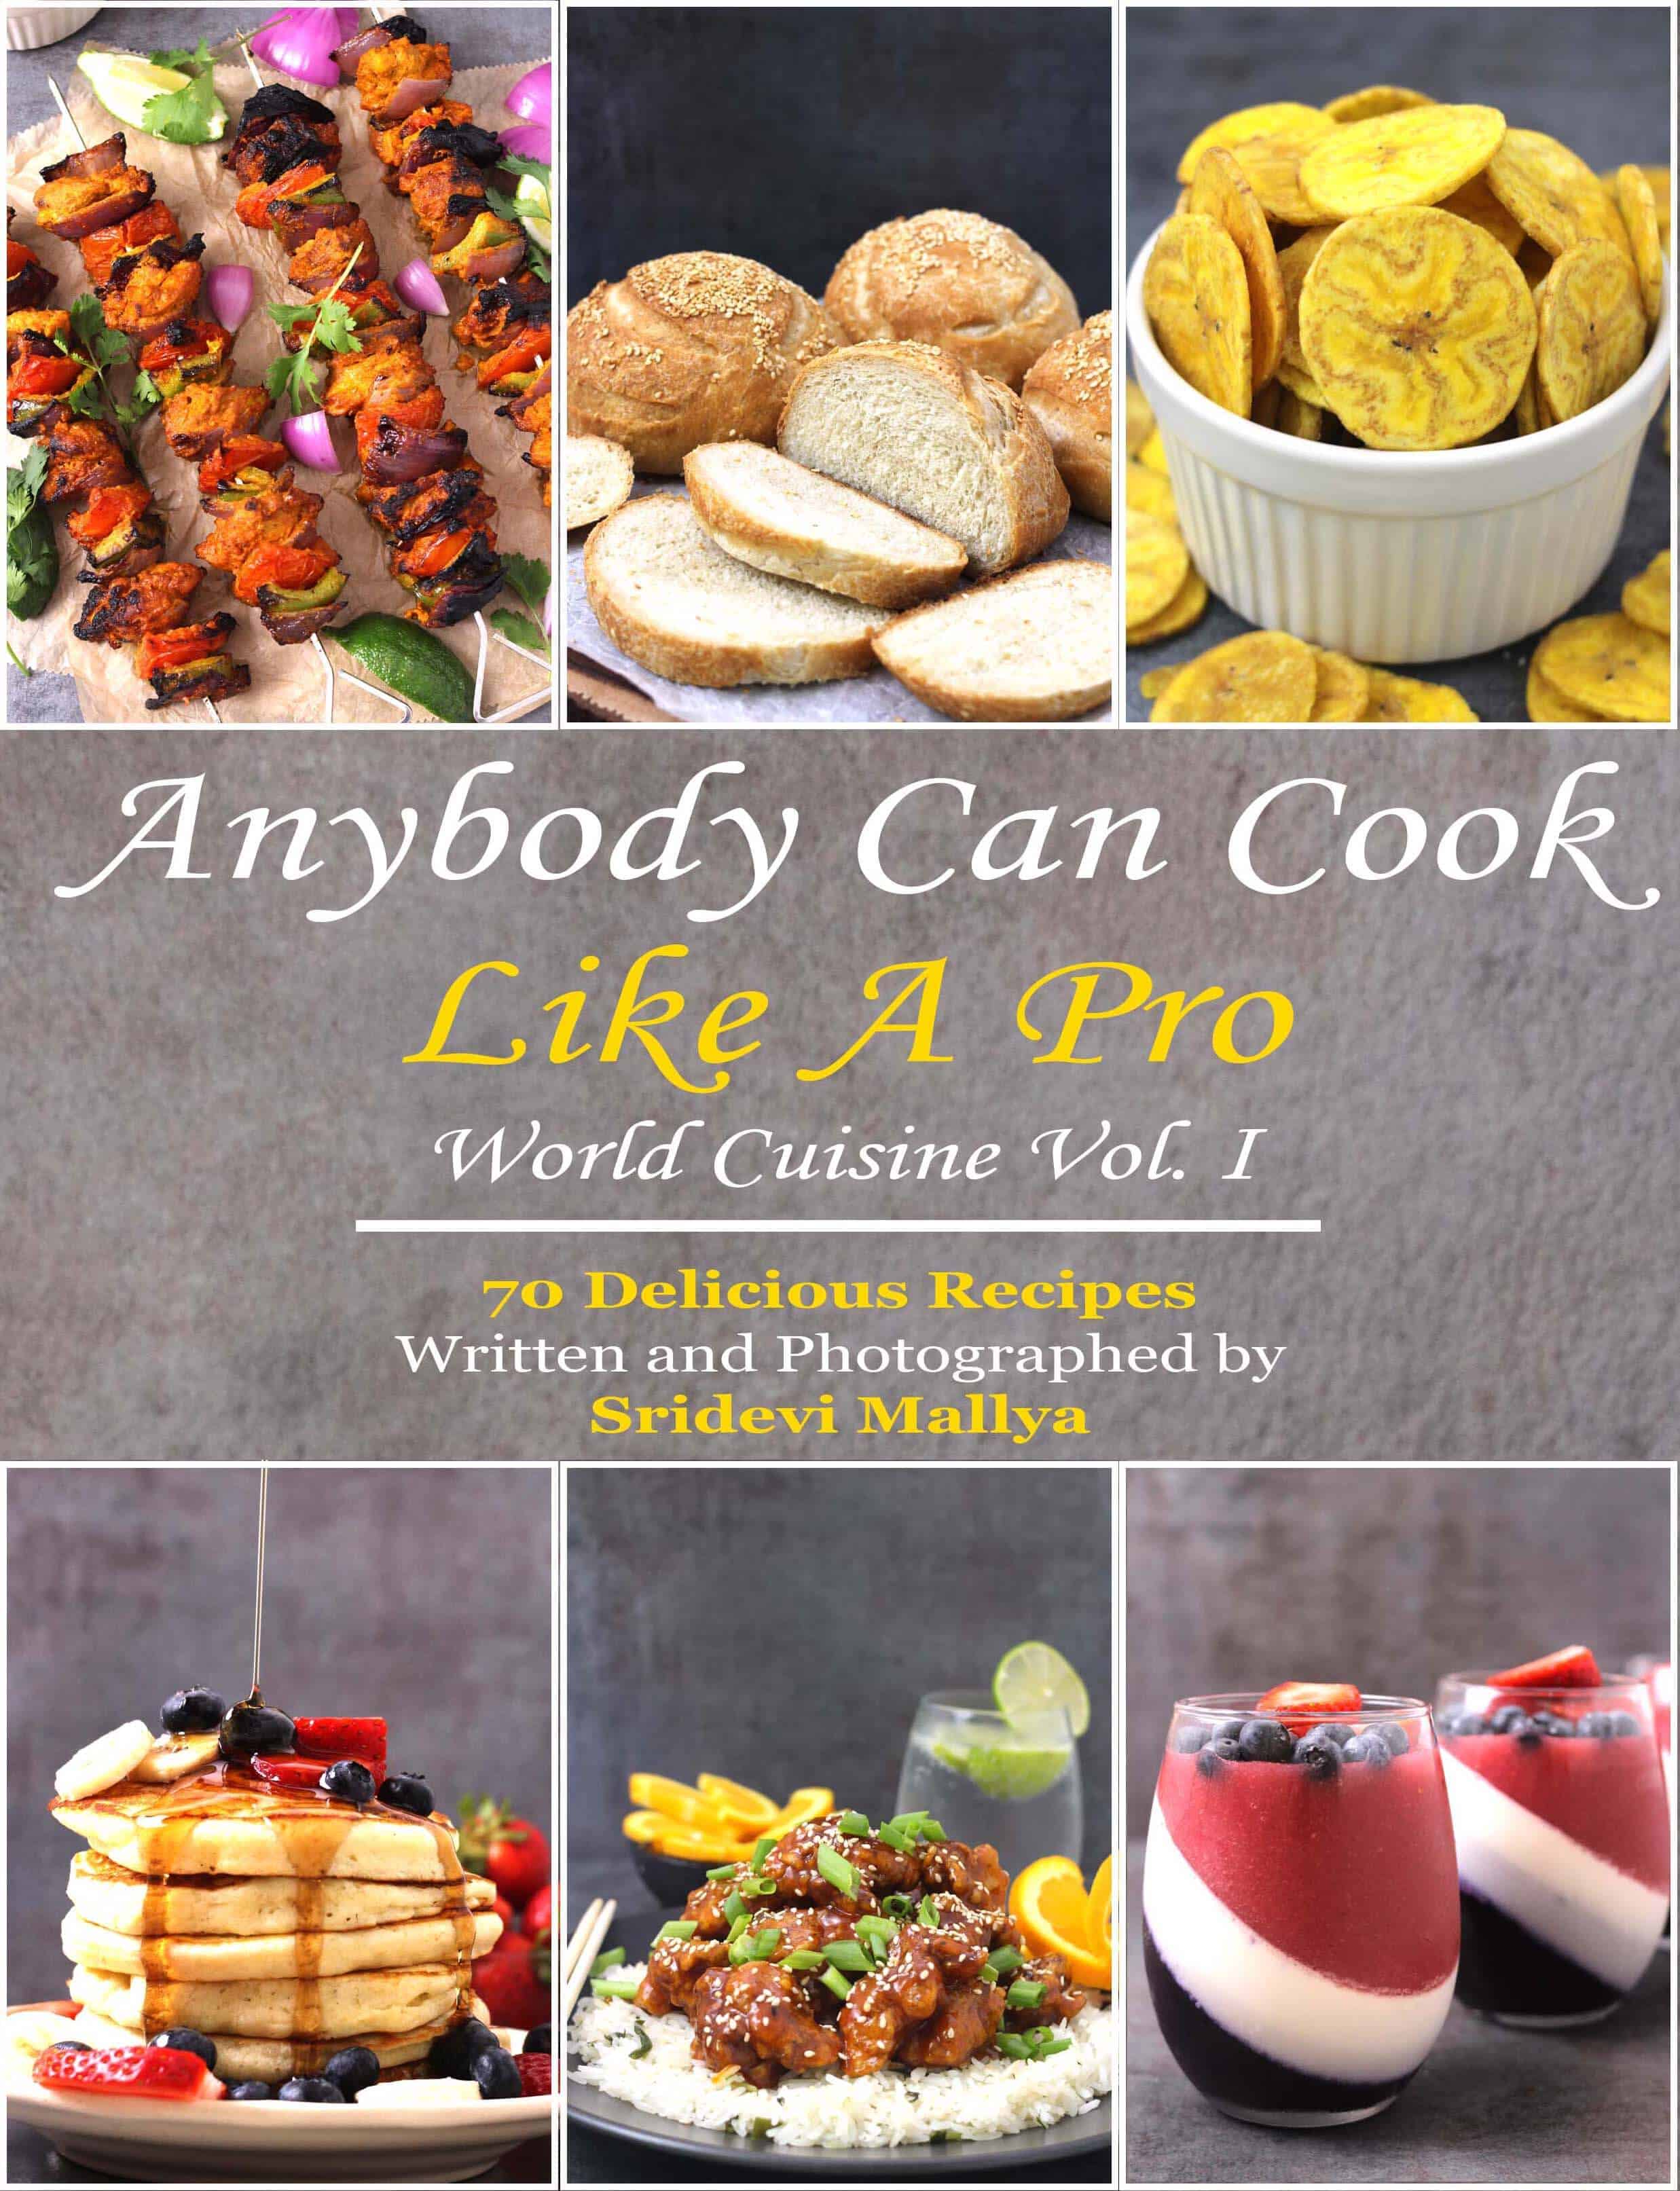 Anybody Can Cook Like A Pro / Cookbook / Indian Cookbook / AMerican Cookbook / Cookbook for beginners / Baking Cookbook / Cookbook Gift Ideas / Cookbook cover pages / cookbook for instant pot / cookbook 101 / cookbook recipes / Holiday Gift Ideas / Christmas Gift Ideas / Cookbook vegetarian/ Cookbook vegan 